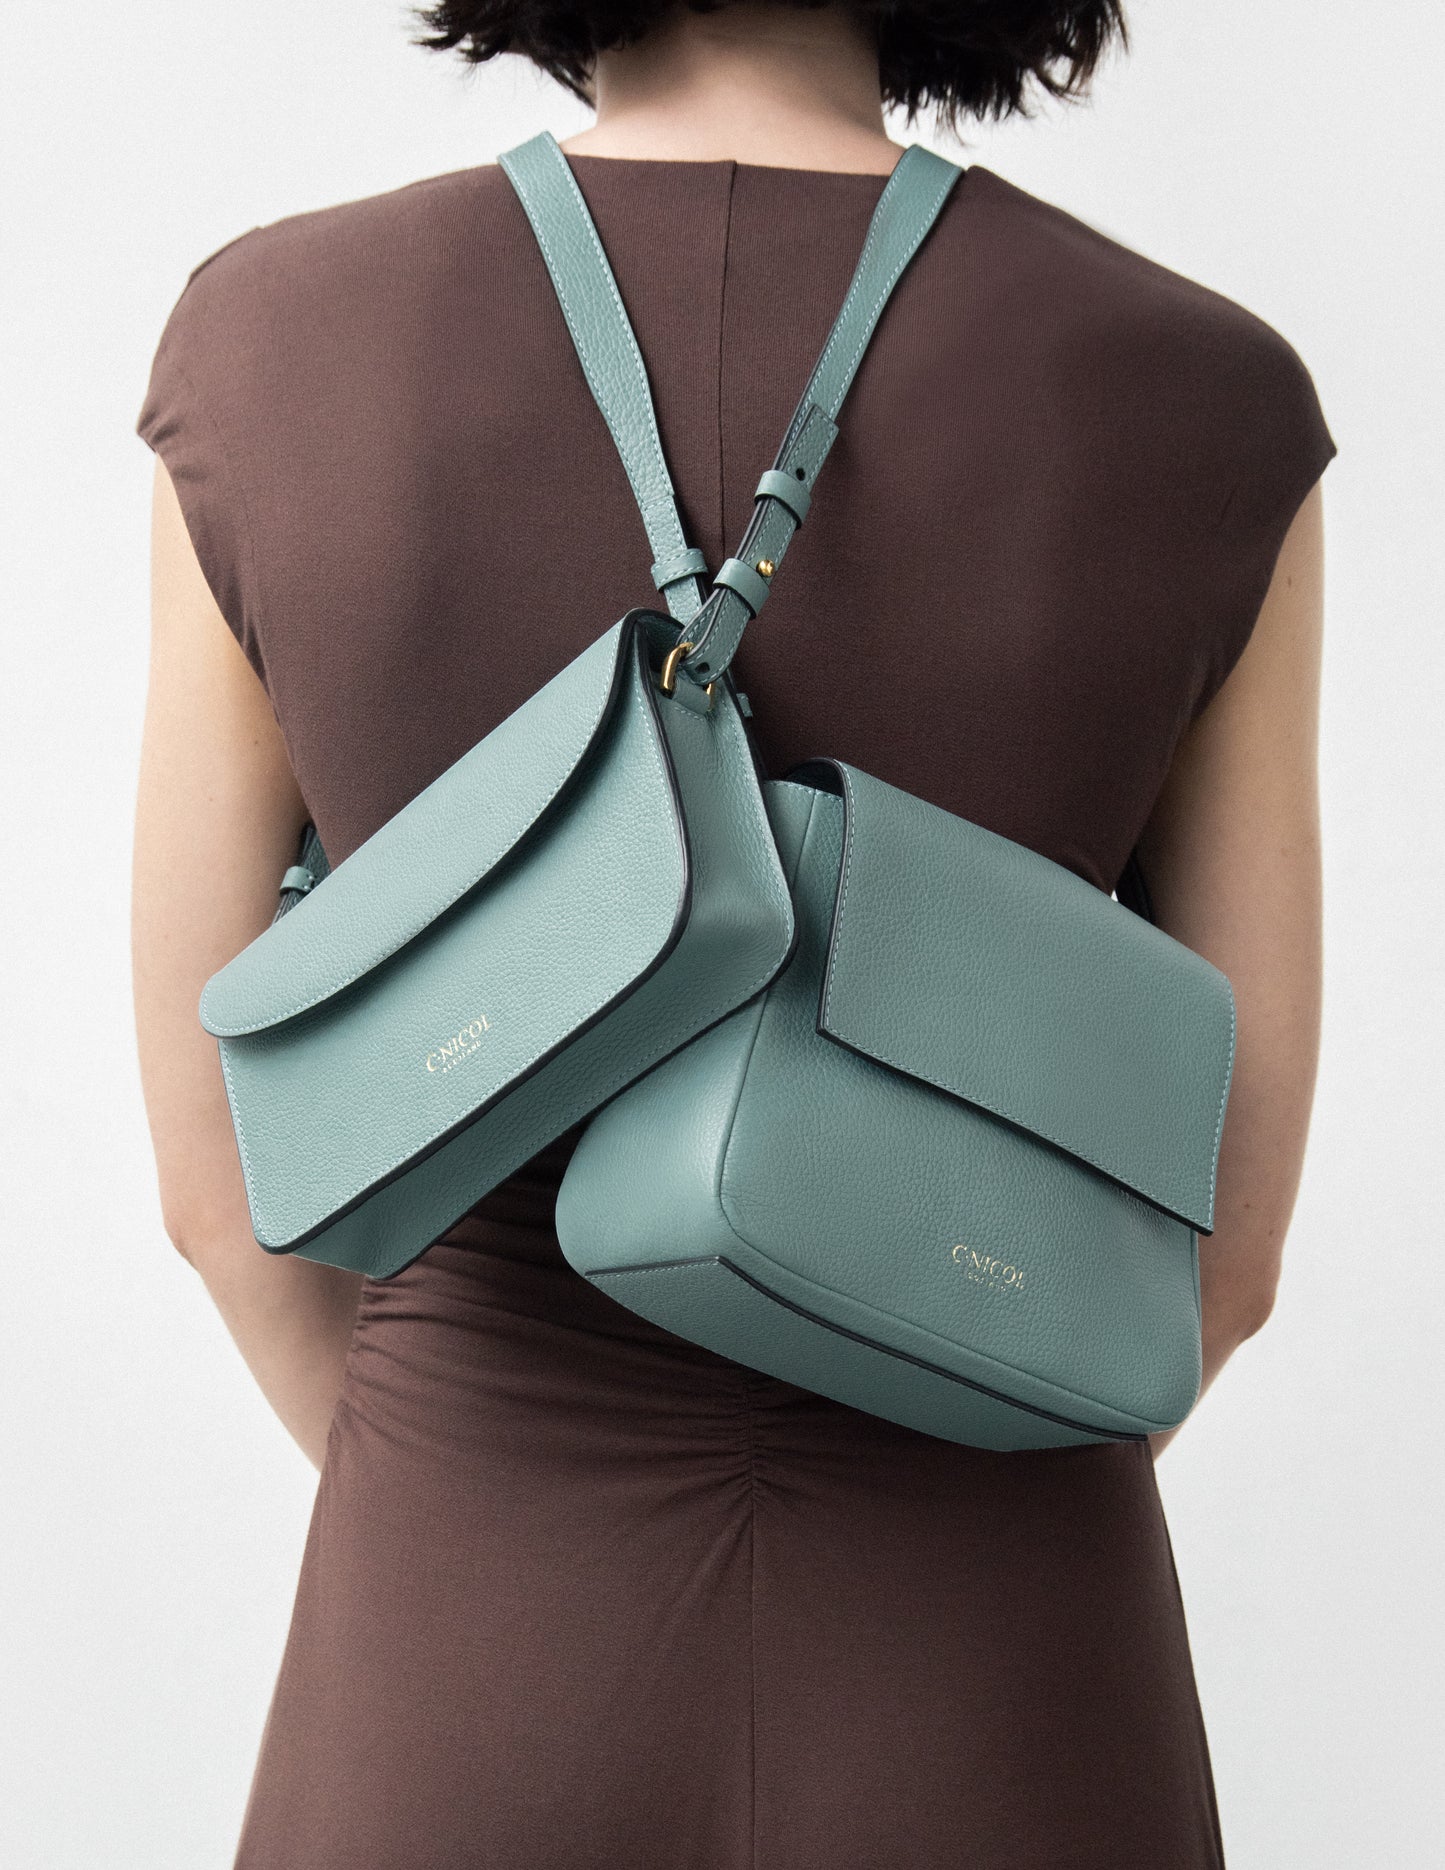 CNicol Green Leather Kate and Fia Bags worn model facing backwards in brown with bags crossing over each other